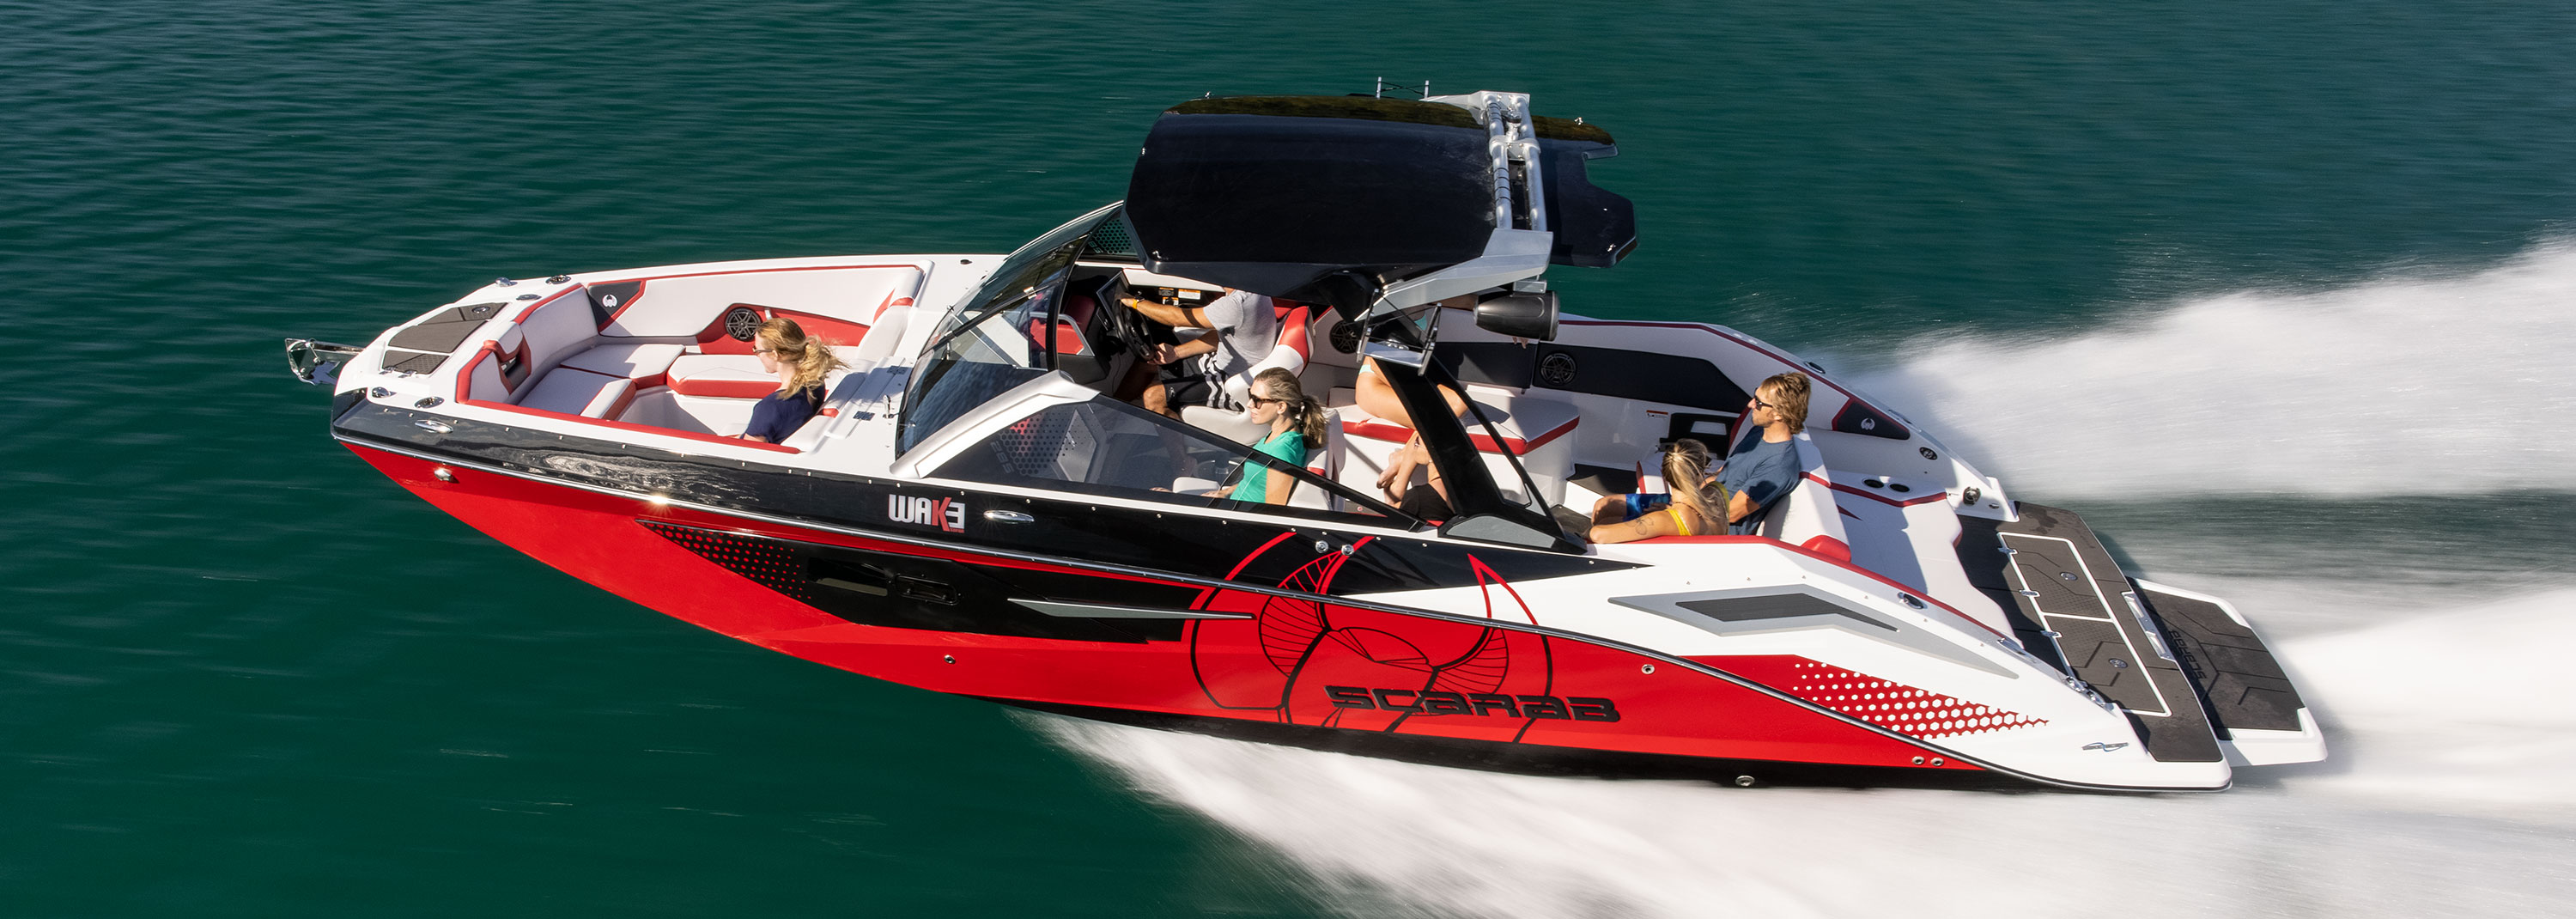 Scarab 285 The World's Largest Jet Boat Forum!